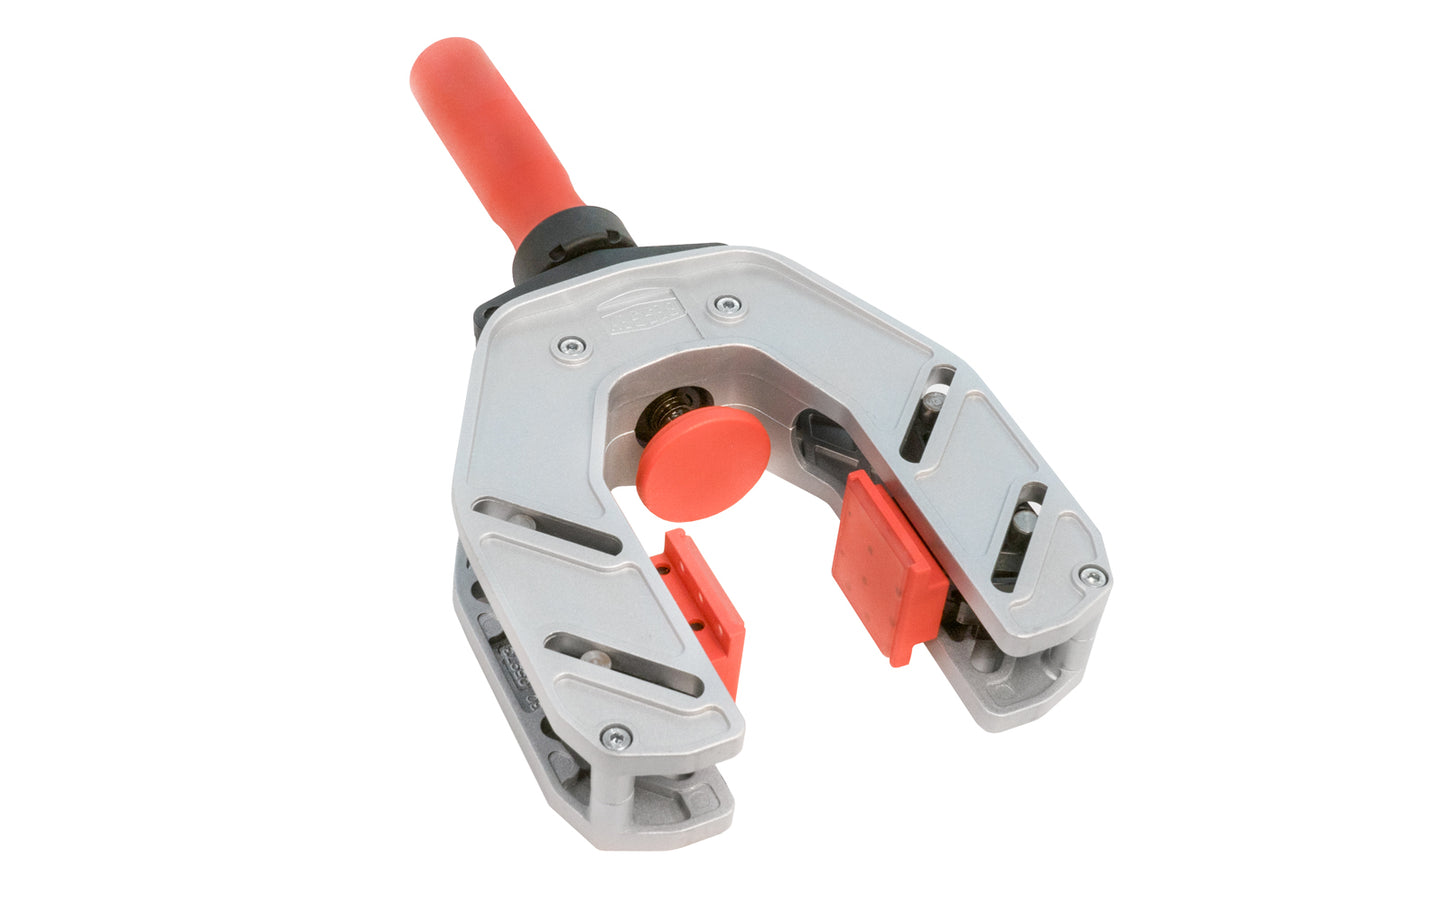 This Bessey One-Hand Edge Clamp EKT-55 is made of lightweight Aluminum construction which makes EKT the perfect tool to secure edge banding with just one hand & improve productivity. Two large non-slip, opposing, gentle jaws for positive grip. The jaws have a non-slip plastic coating for a solid grip. Made in Germany ~ 911620067956